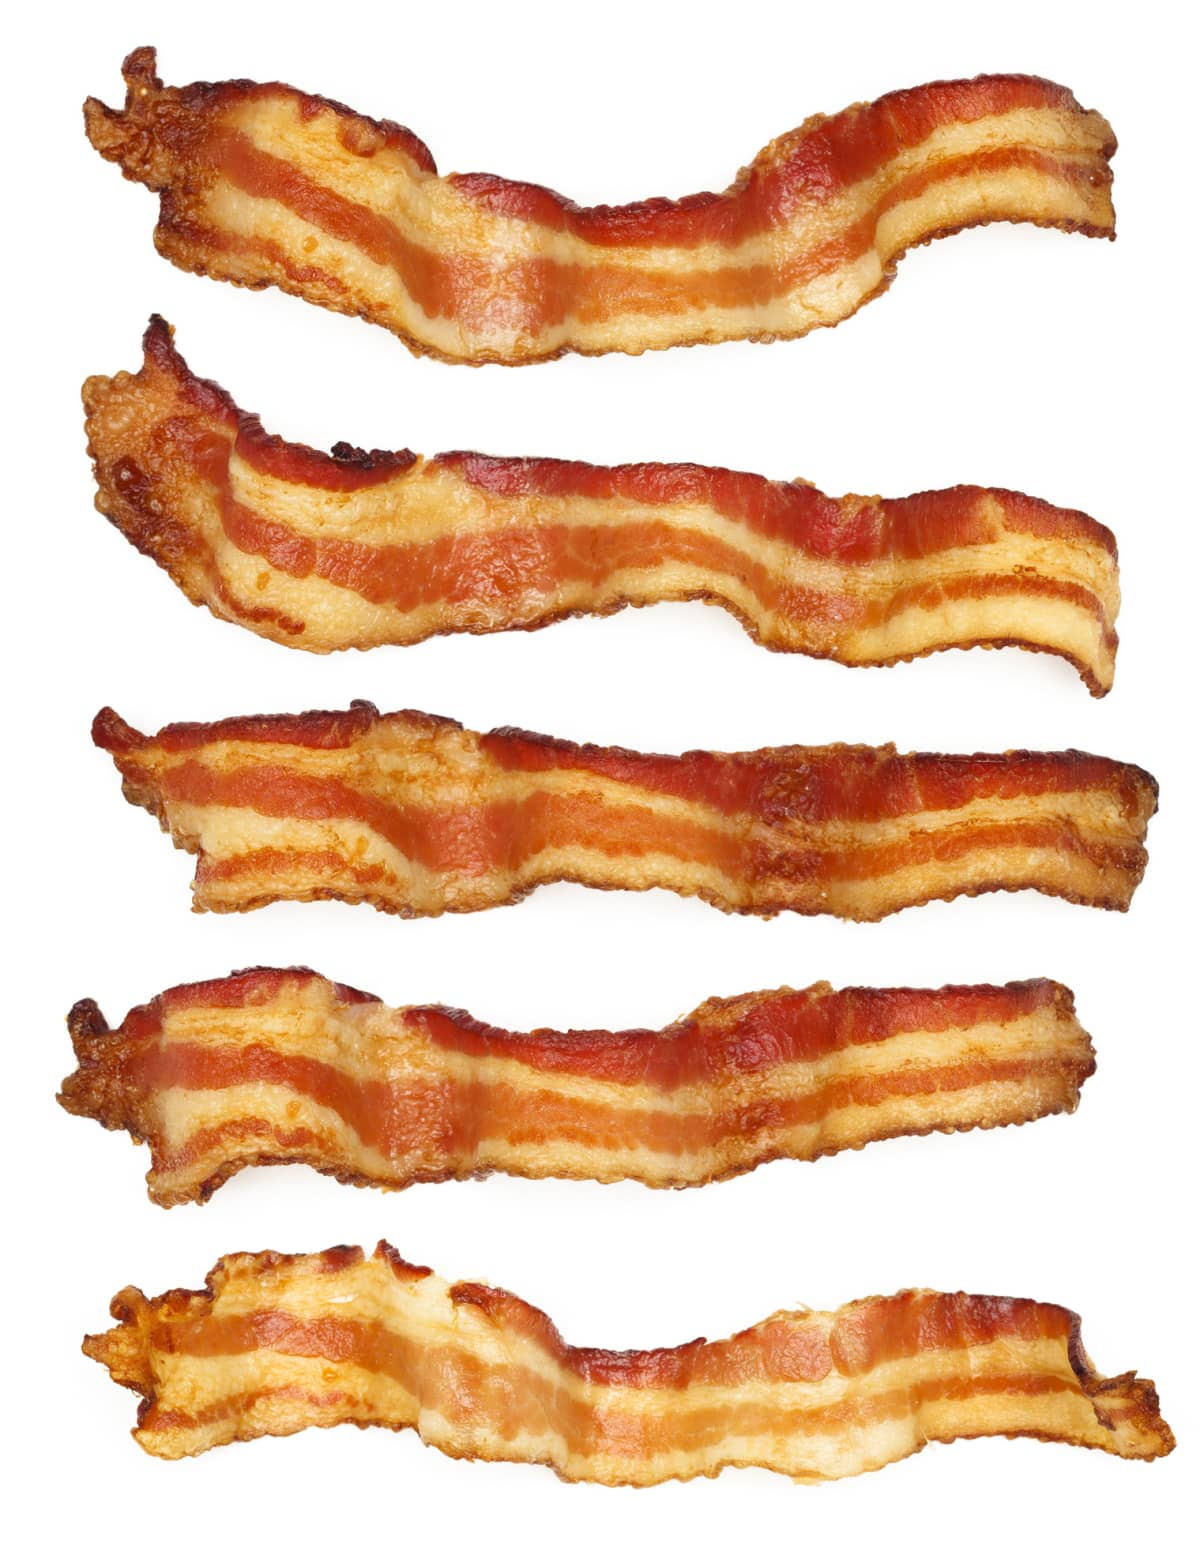 Distinct slices of freshly cooked bacon